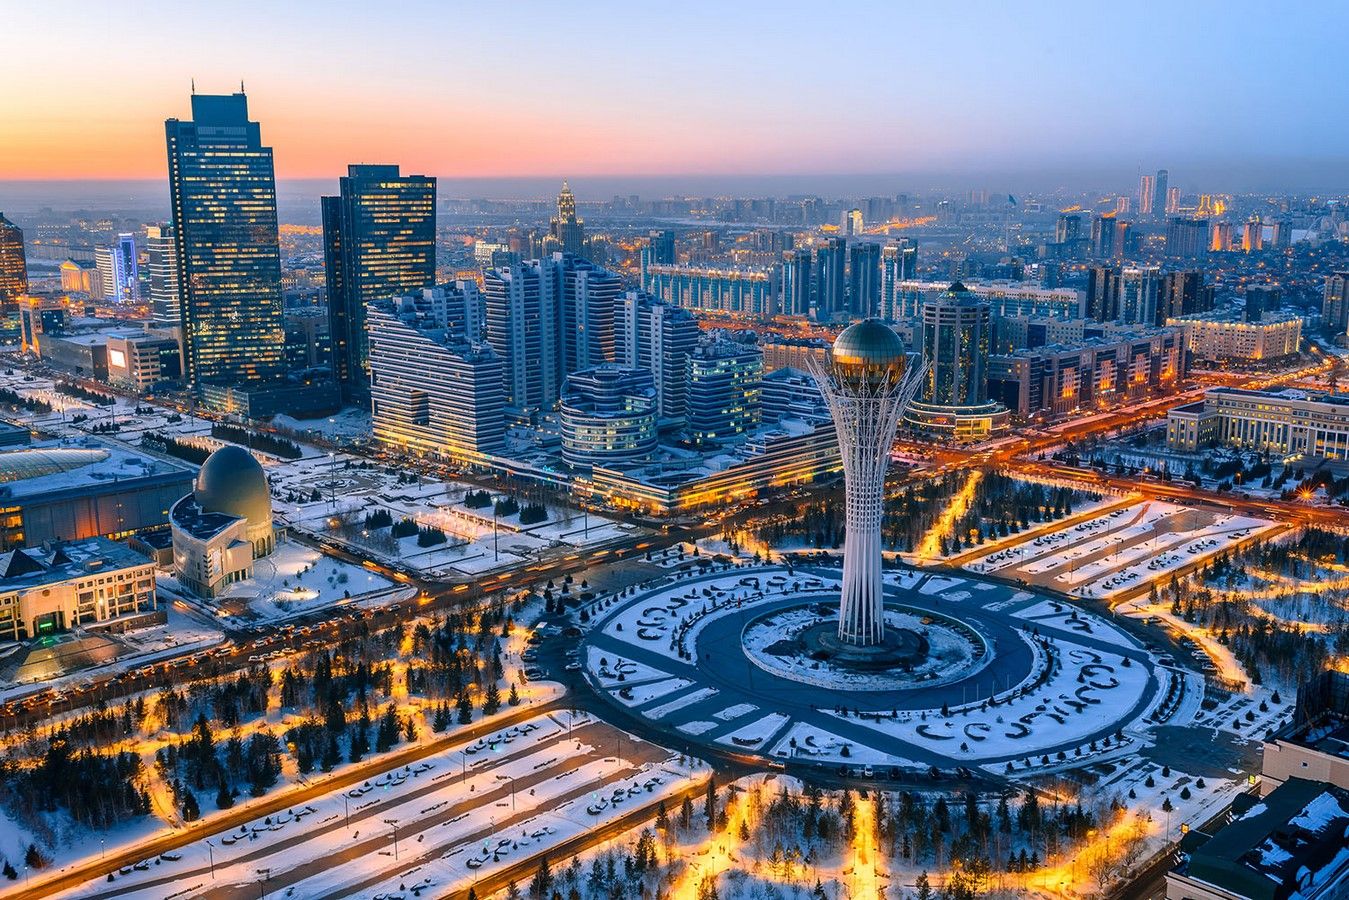 Astana is a symbol of Kazakhstan's growth over the last 30-odd years